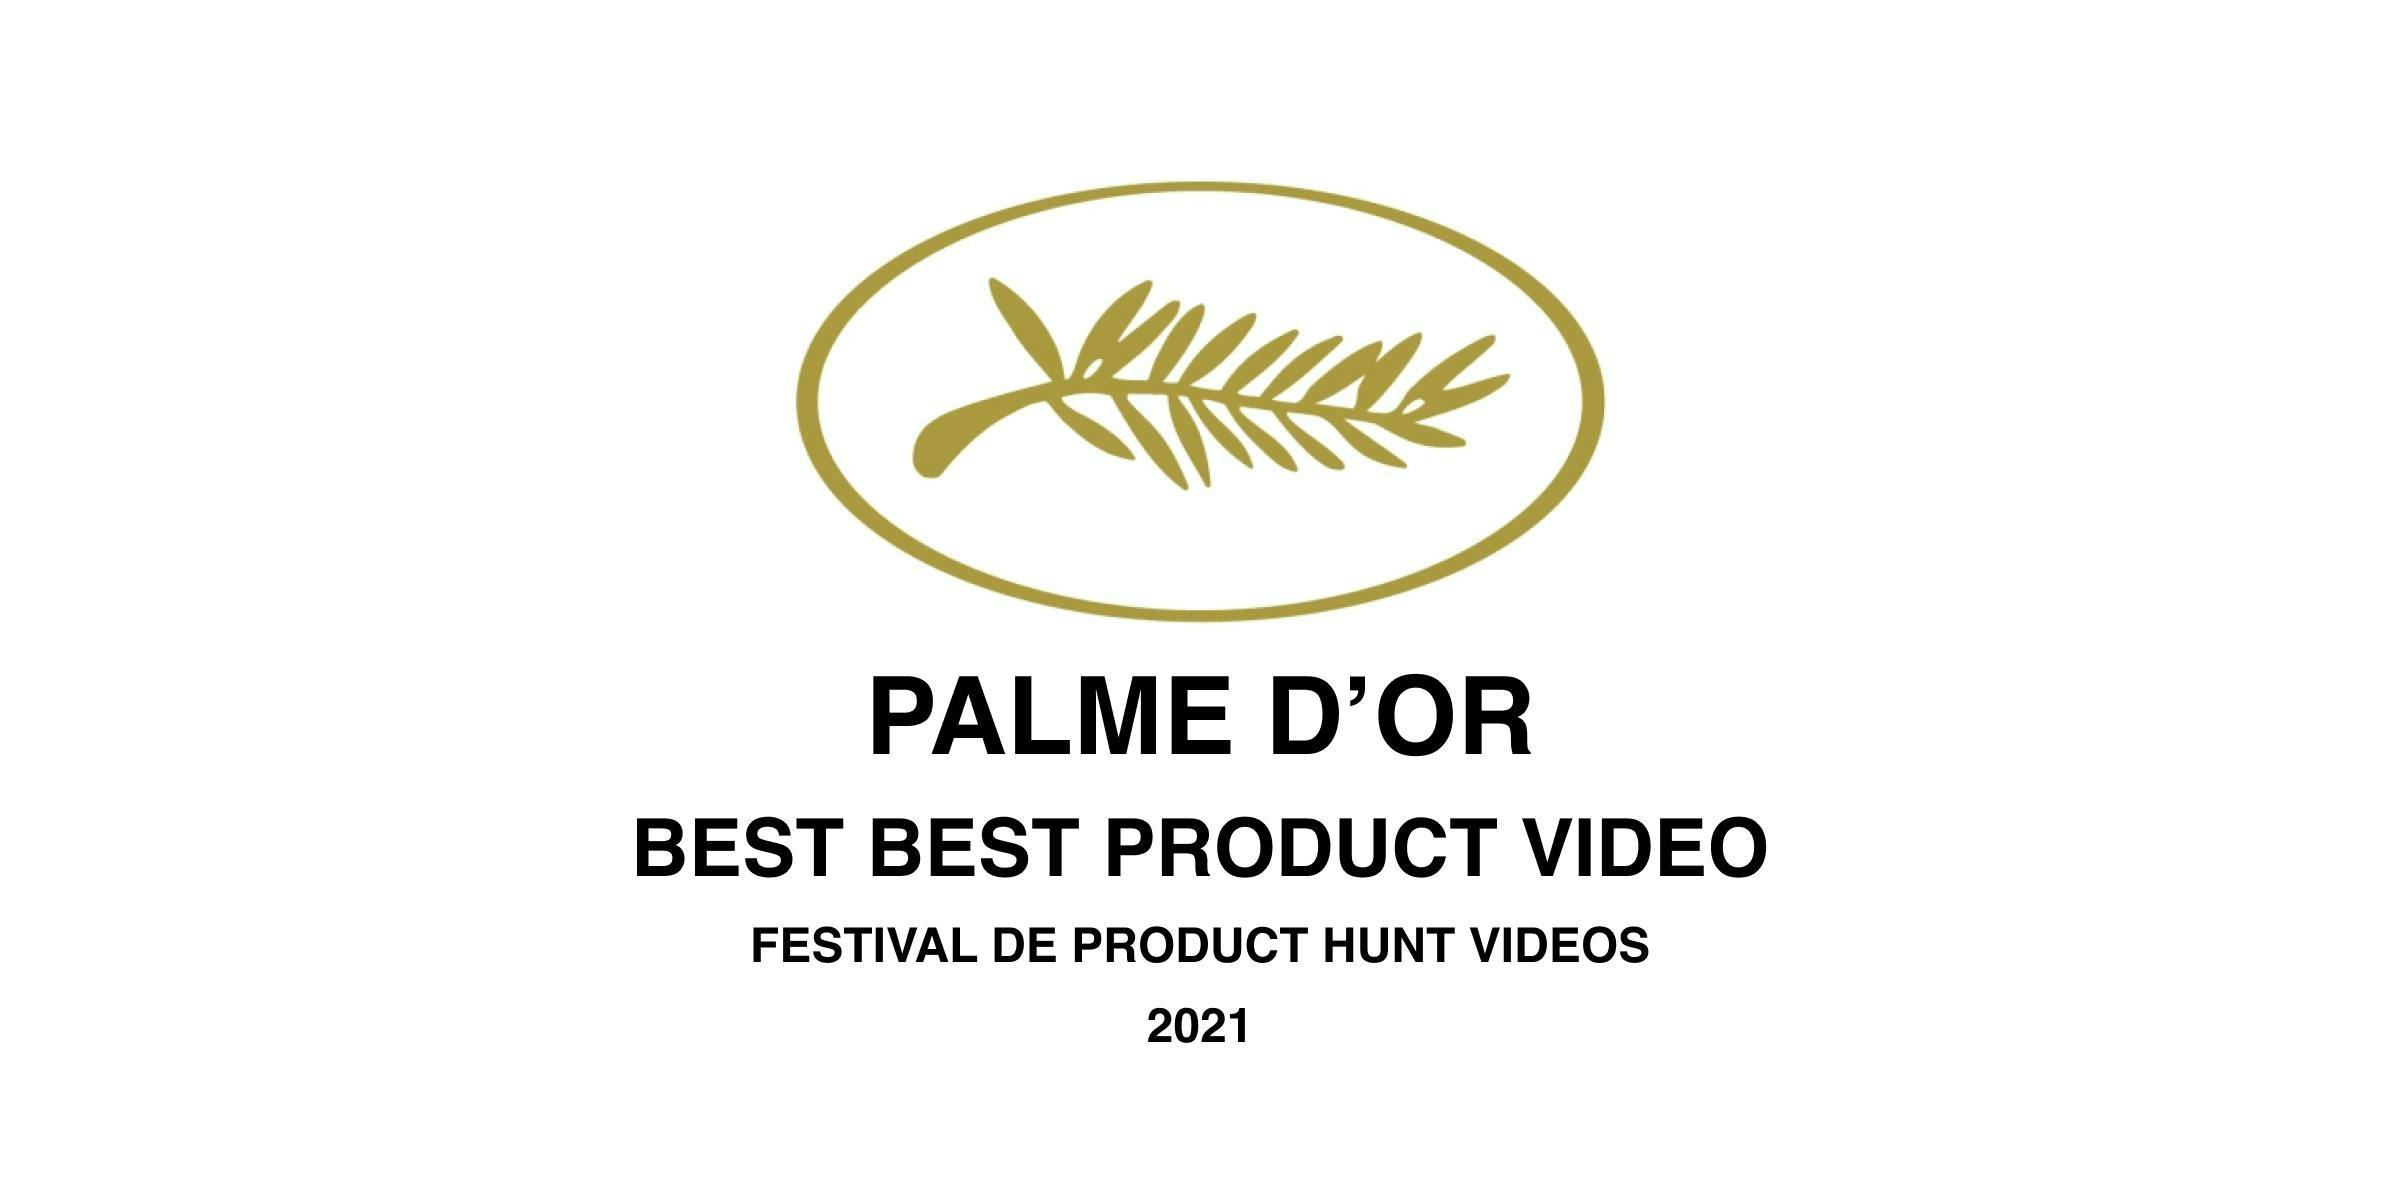 The Very Best Product Video of 2021